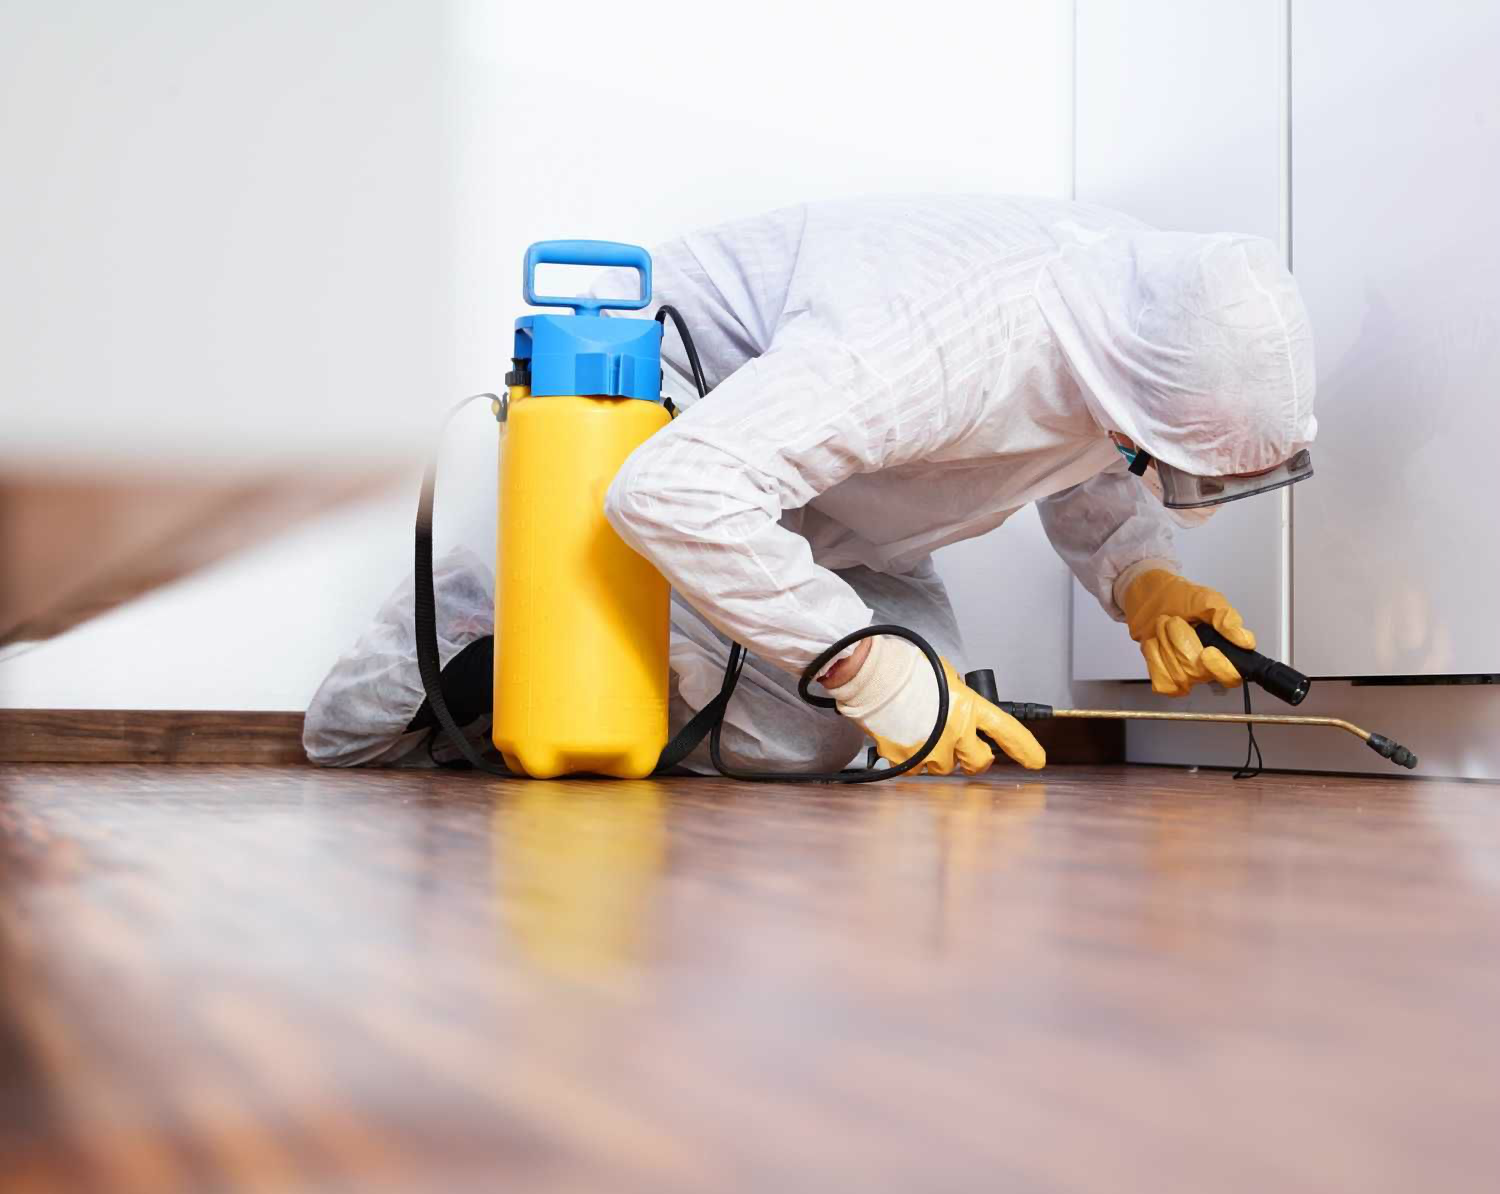 Insecticide Use: Keeping Your Home Pest-Free and Safe